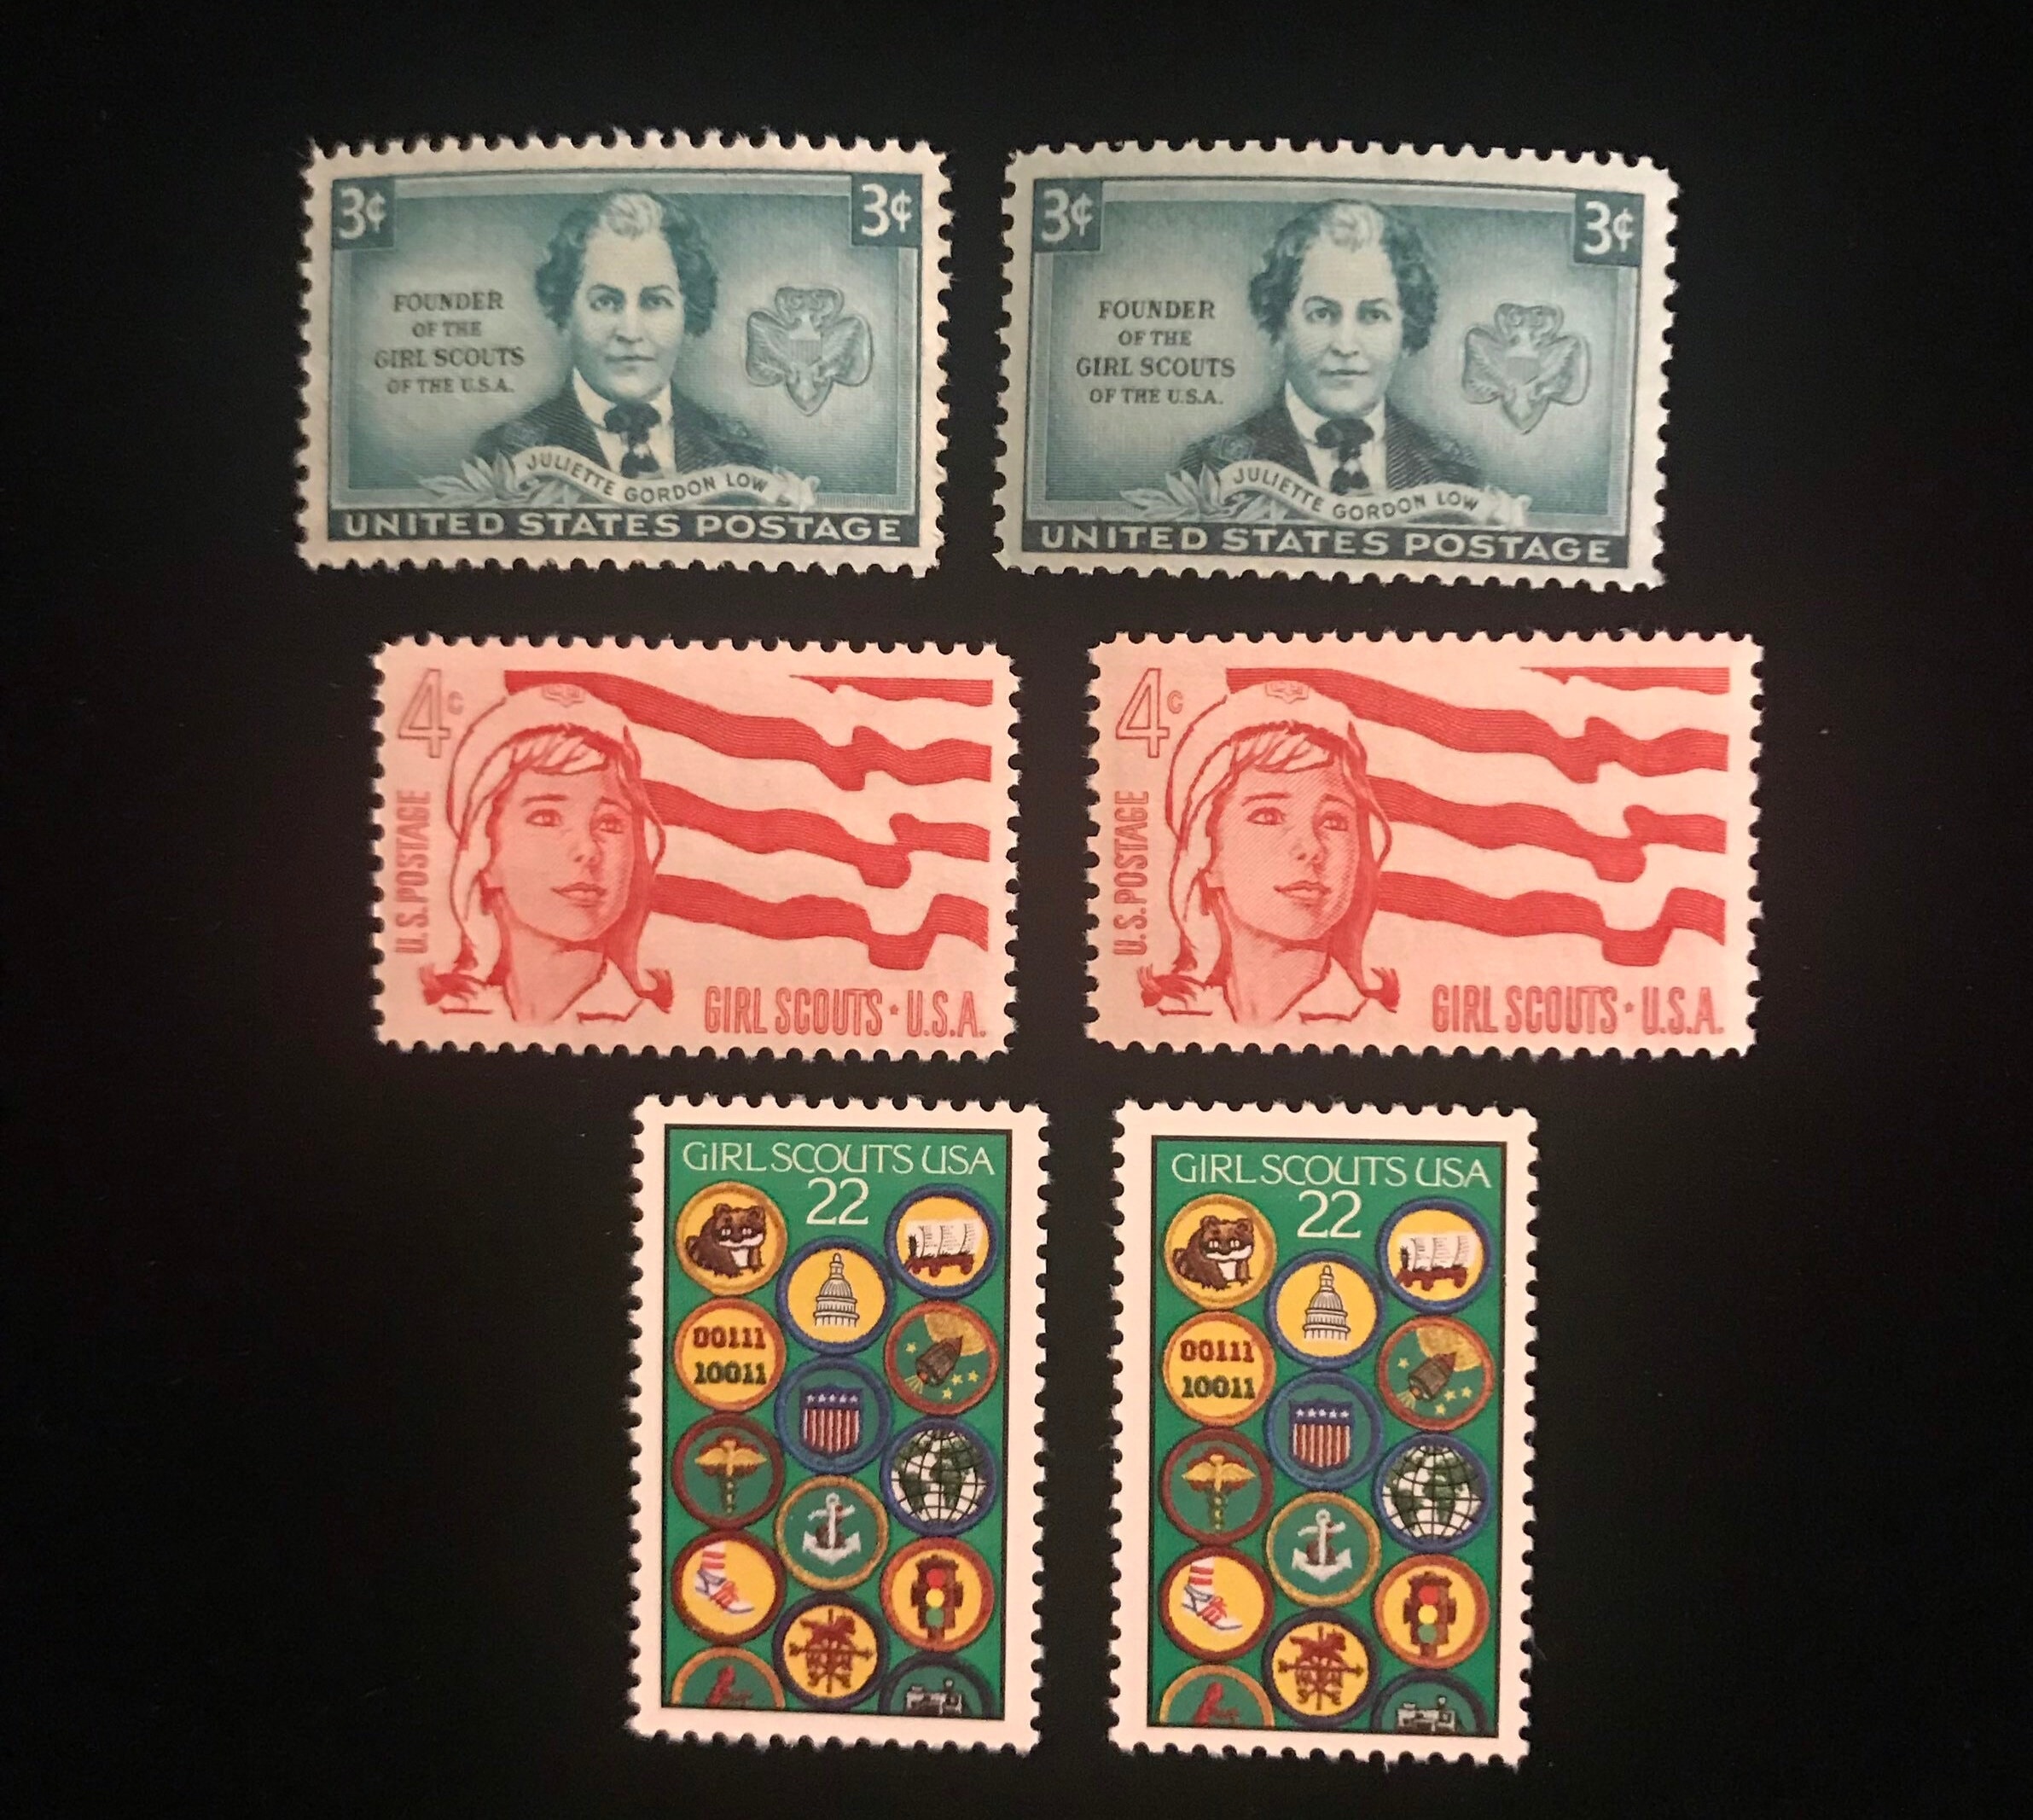 10 Boy Scout Stamps Vintage Unused 1960 Boy Scouts Postage Stamps